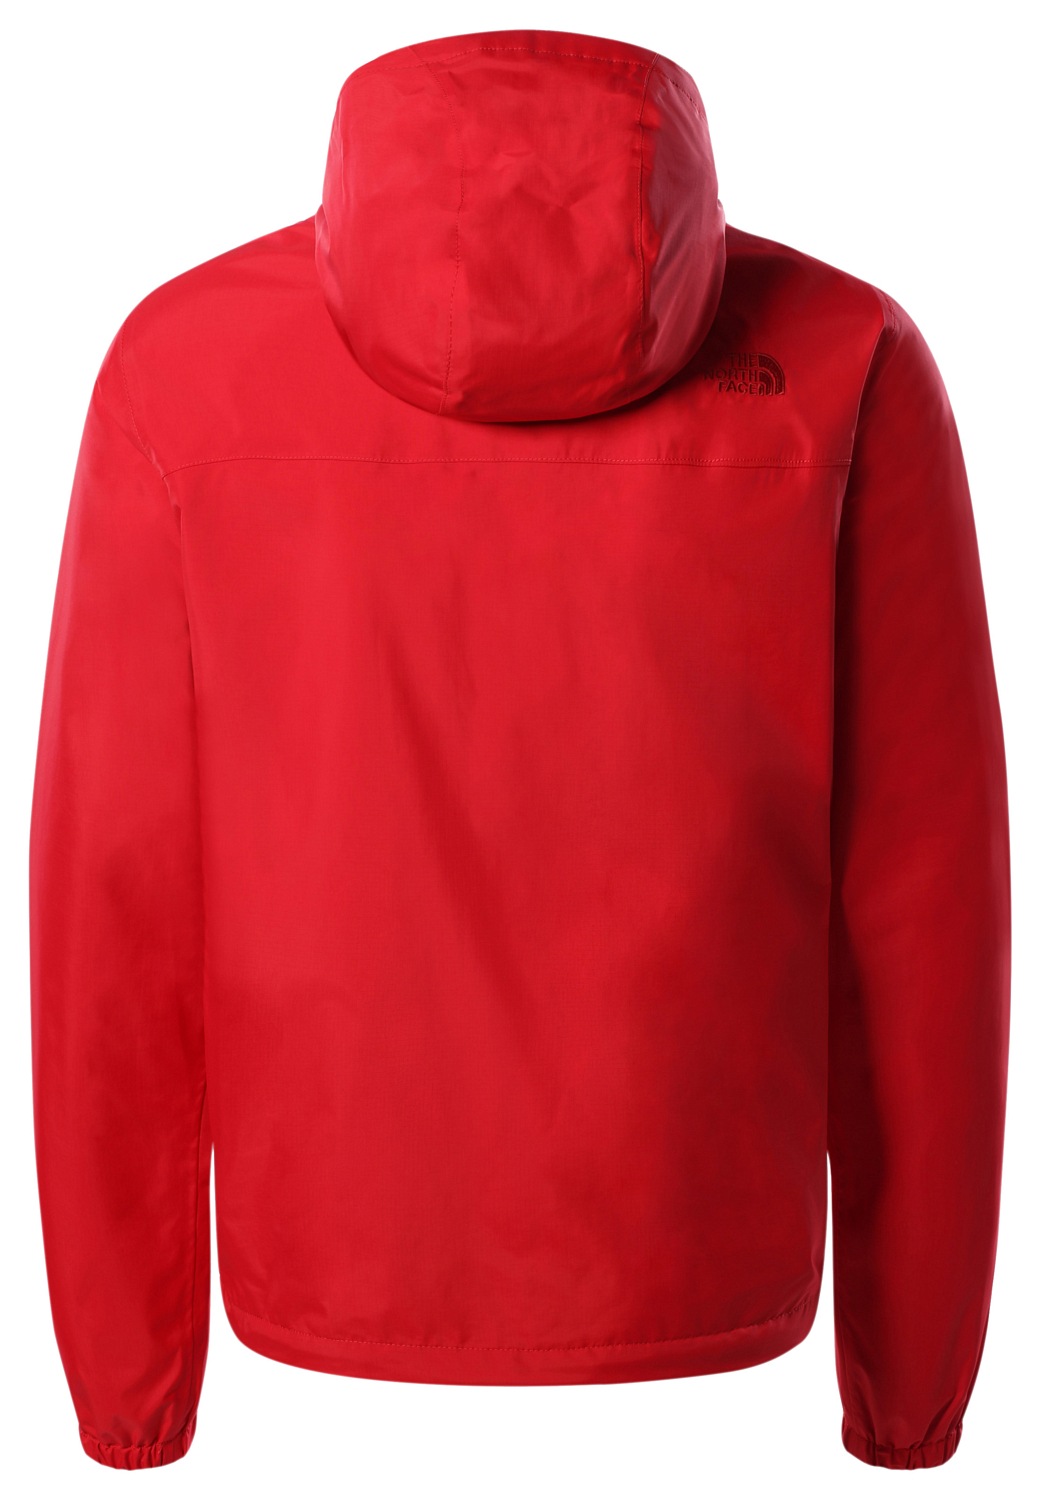 Куртка The North Face Resolve 2 Jacket Red